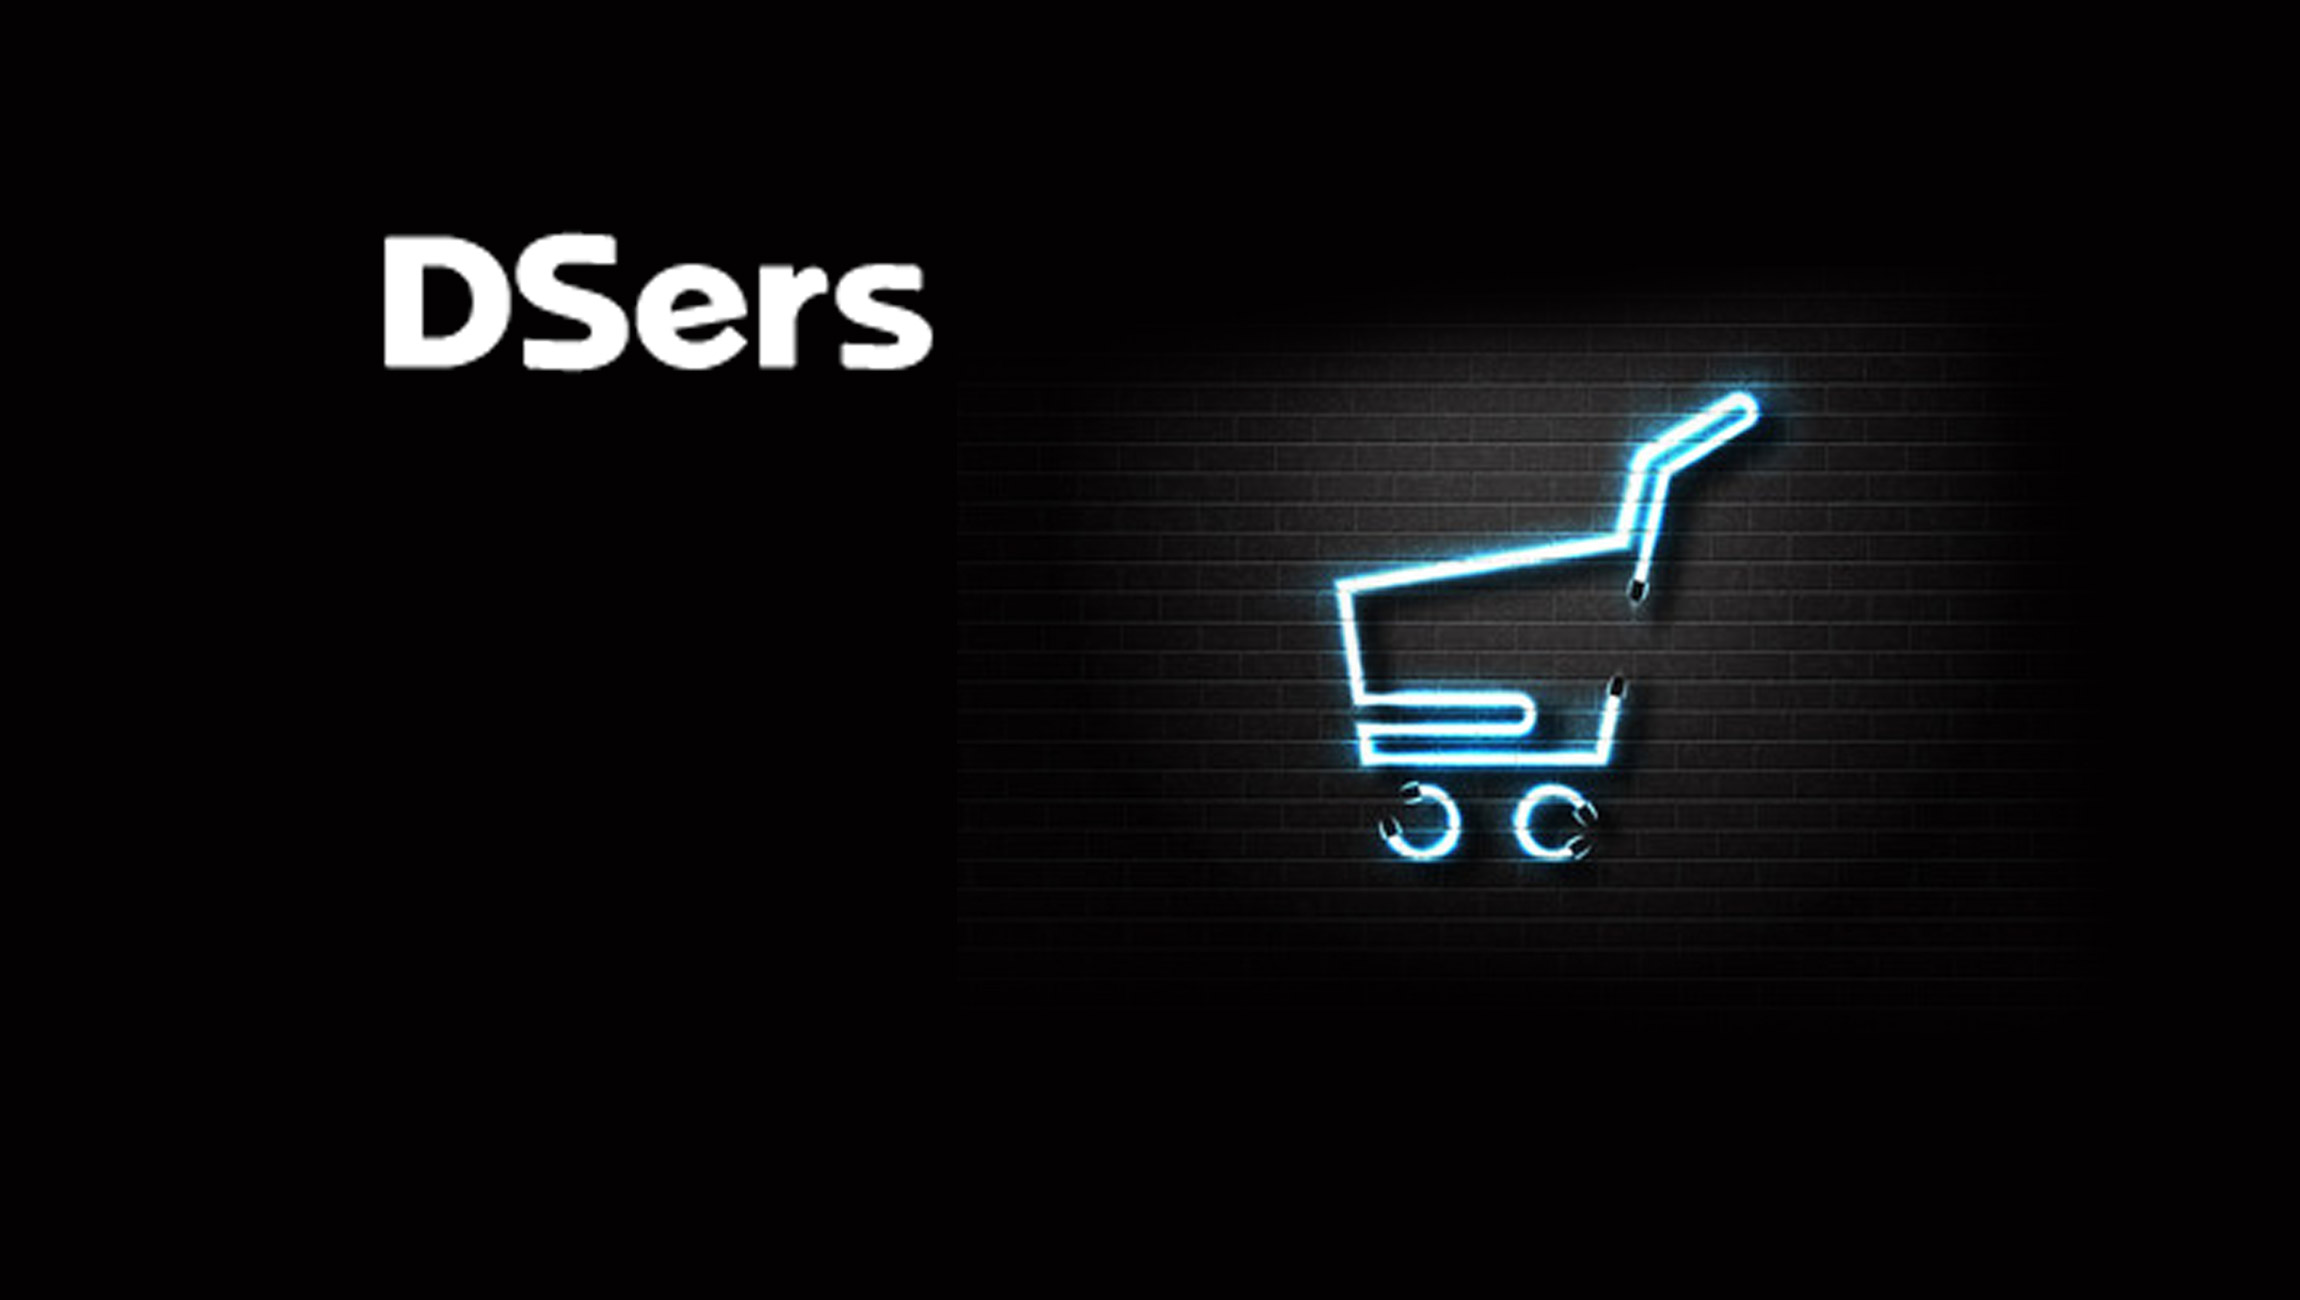 DSers-Enables-New-Cross-border-E-commerce-Opportunities-for-Merchants-in-Post-Pandemic-Era